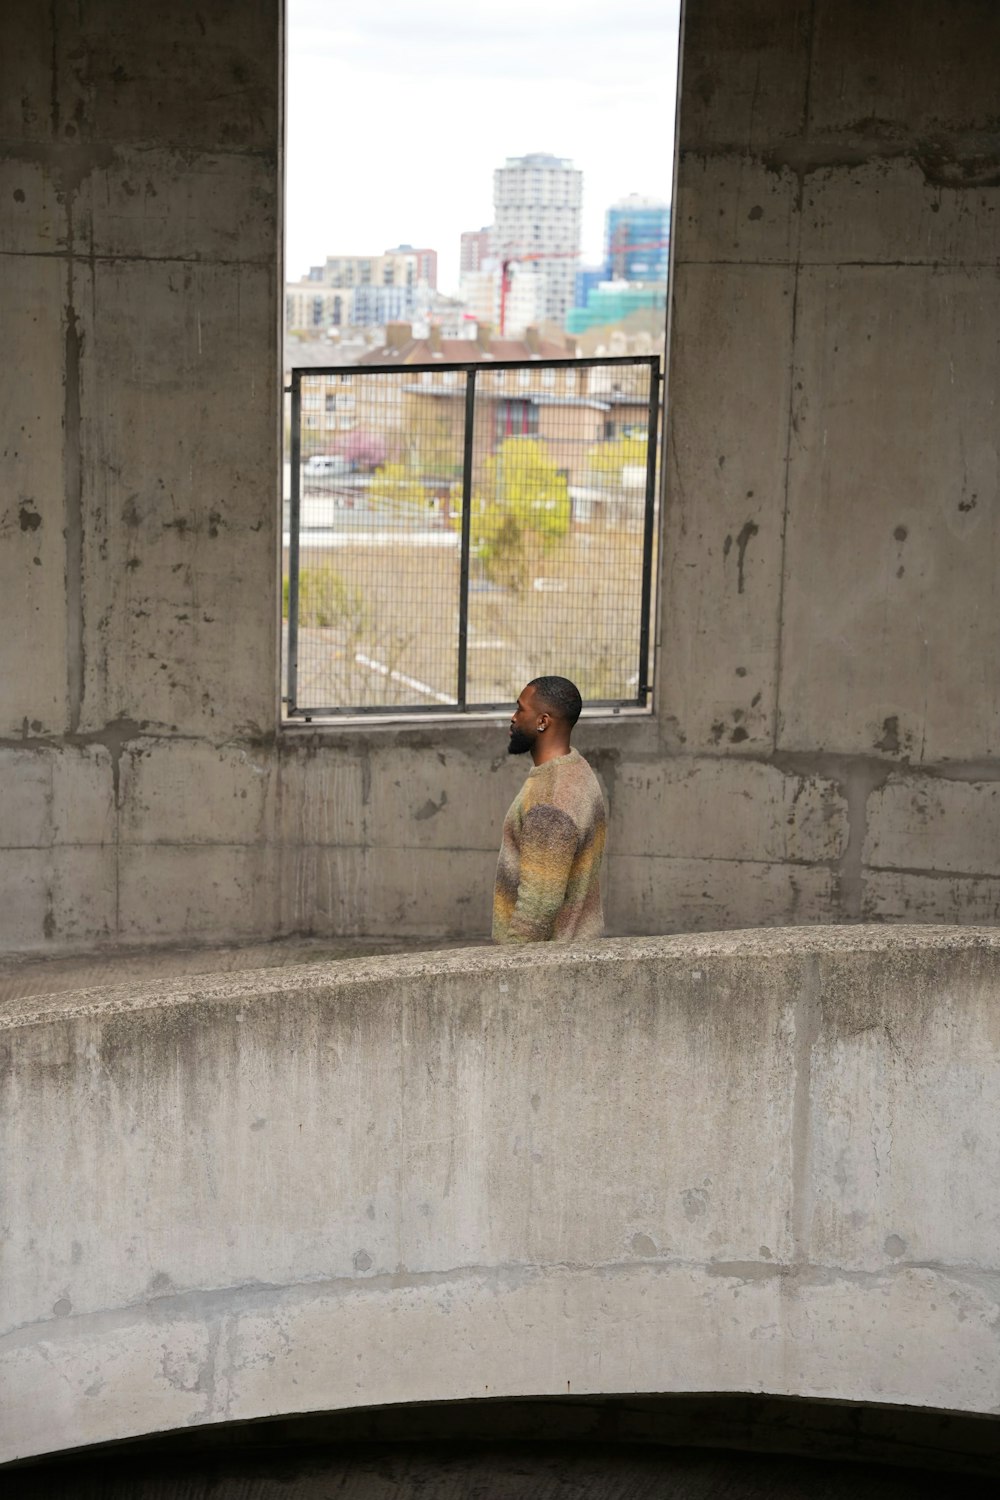 a person sitting on a ledge looking out a window